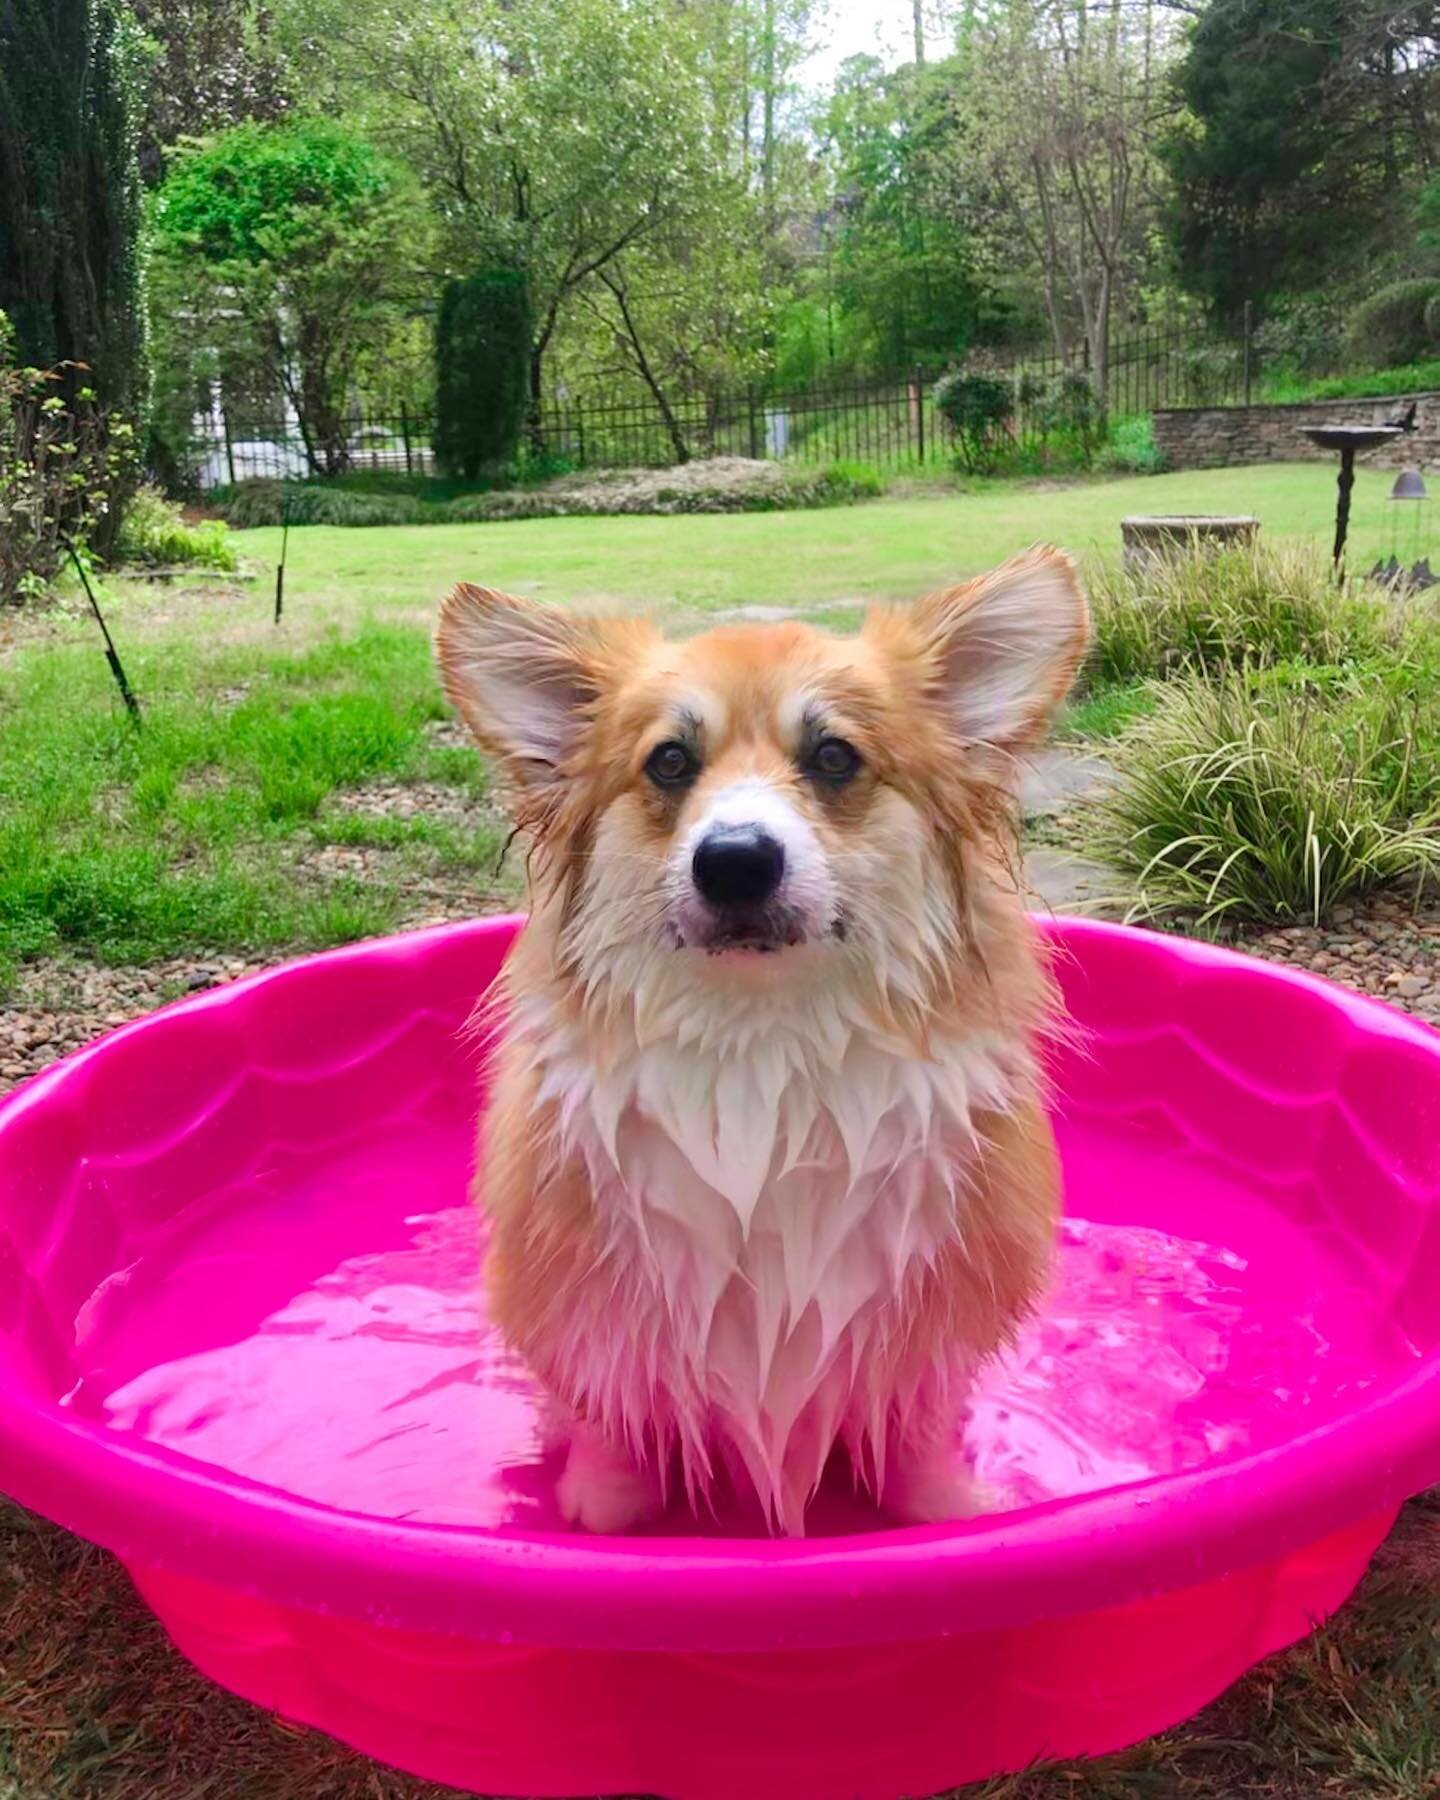 when the 🐰 brings you a baby pool.